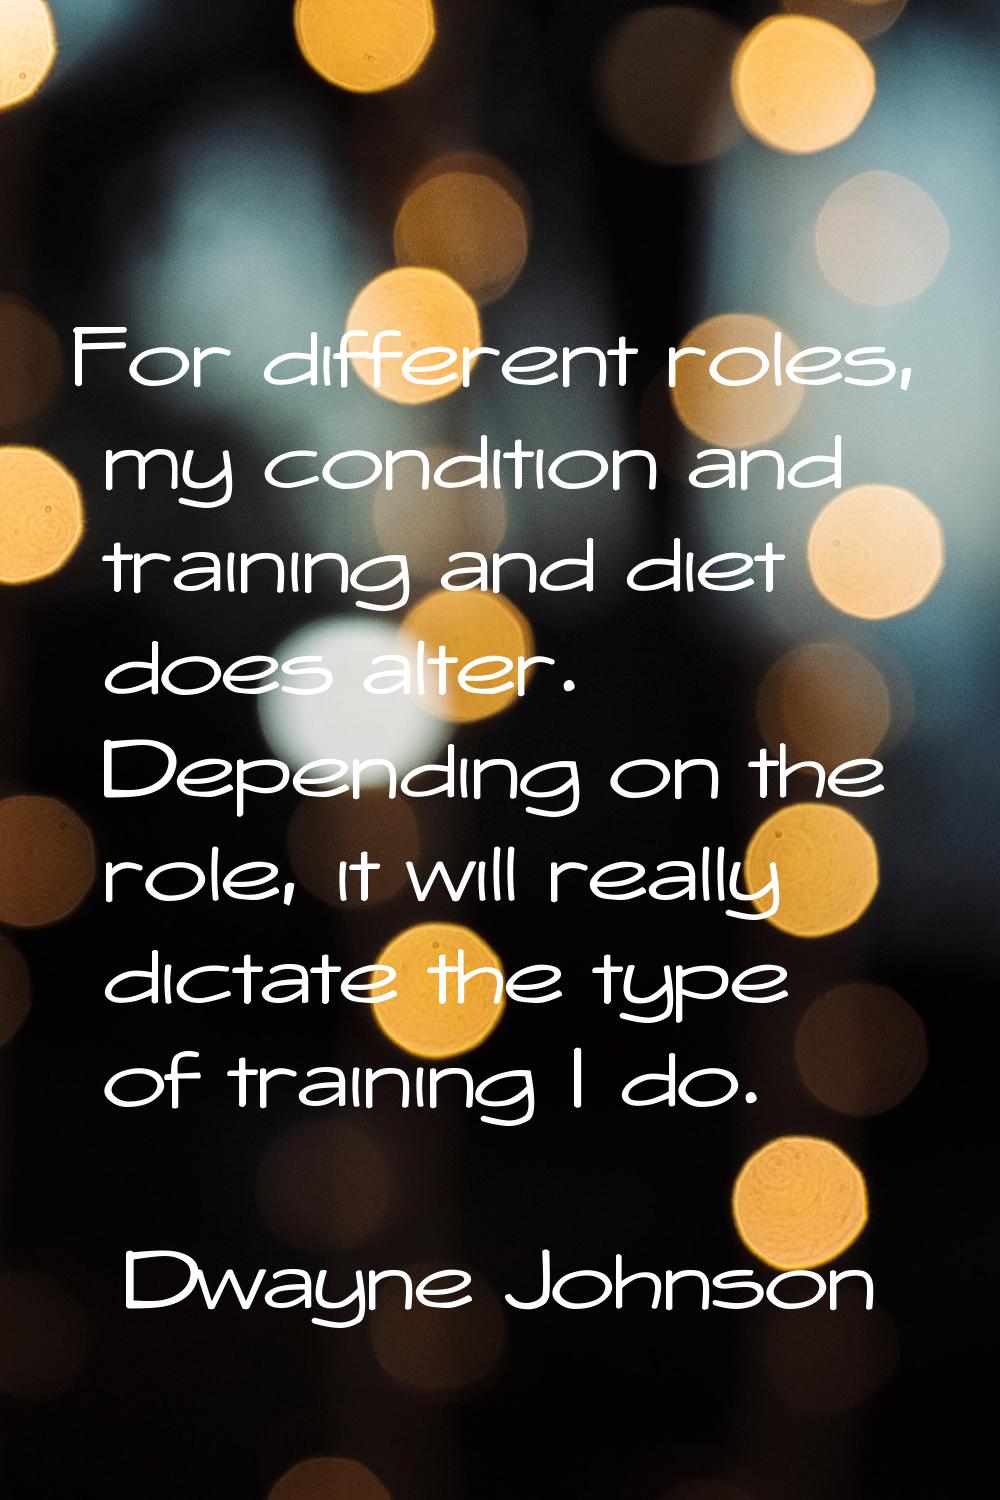 For different roles, my condition and training and diet does alter. Depending on the role, it will 